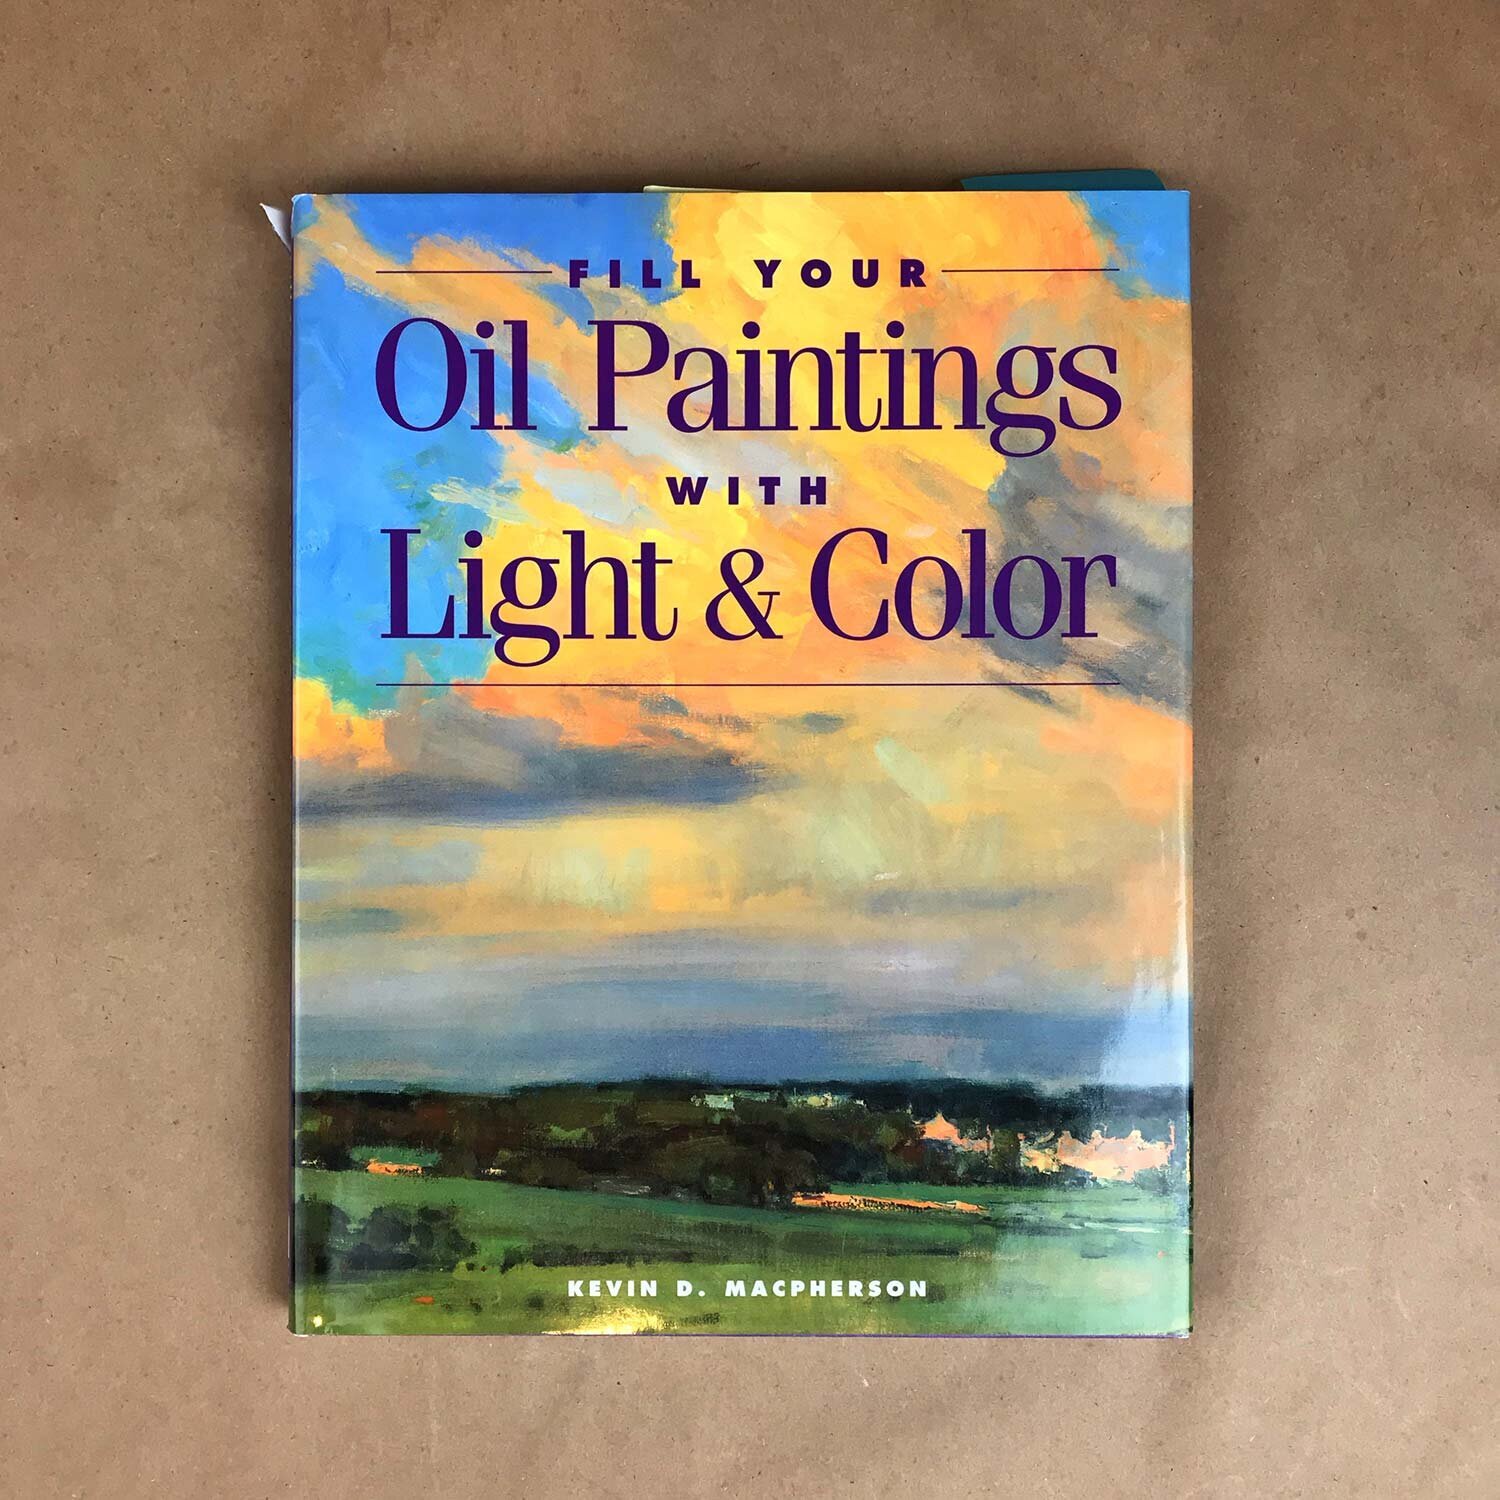 Painting with Bob Ross: Learn to Paint in Oil Step by Step! [Book]